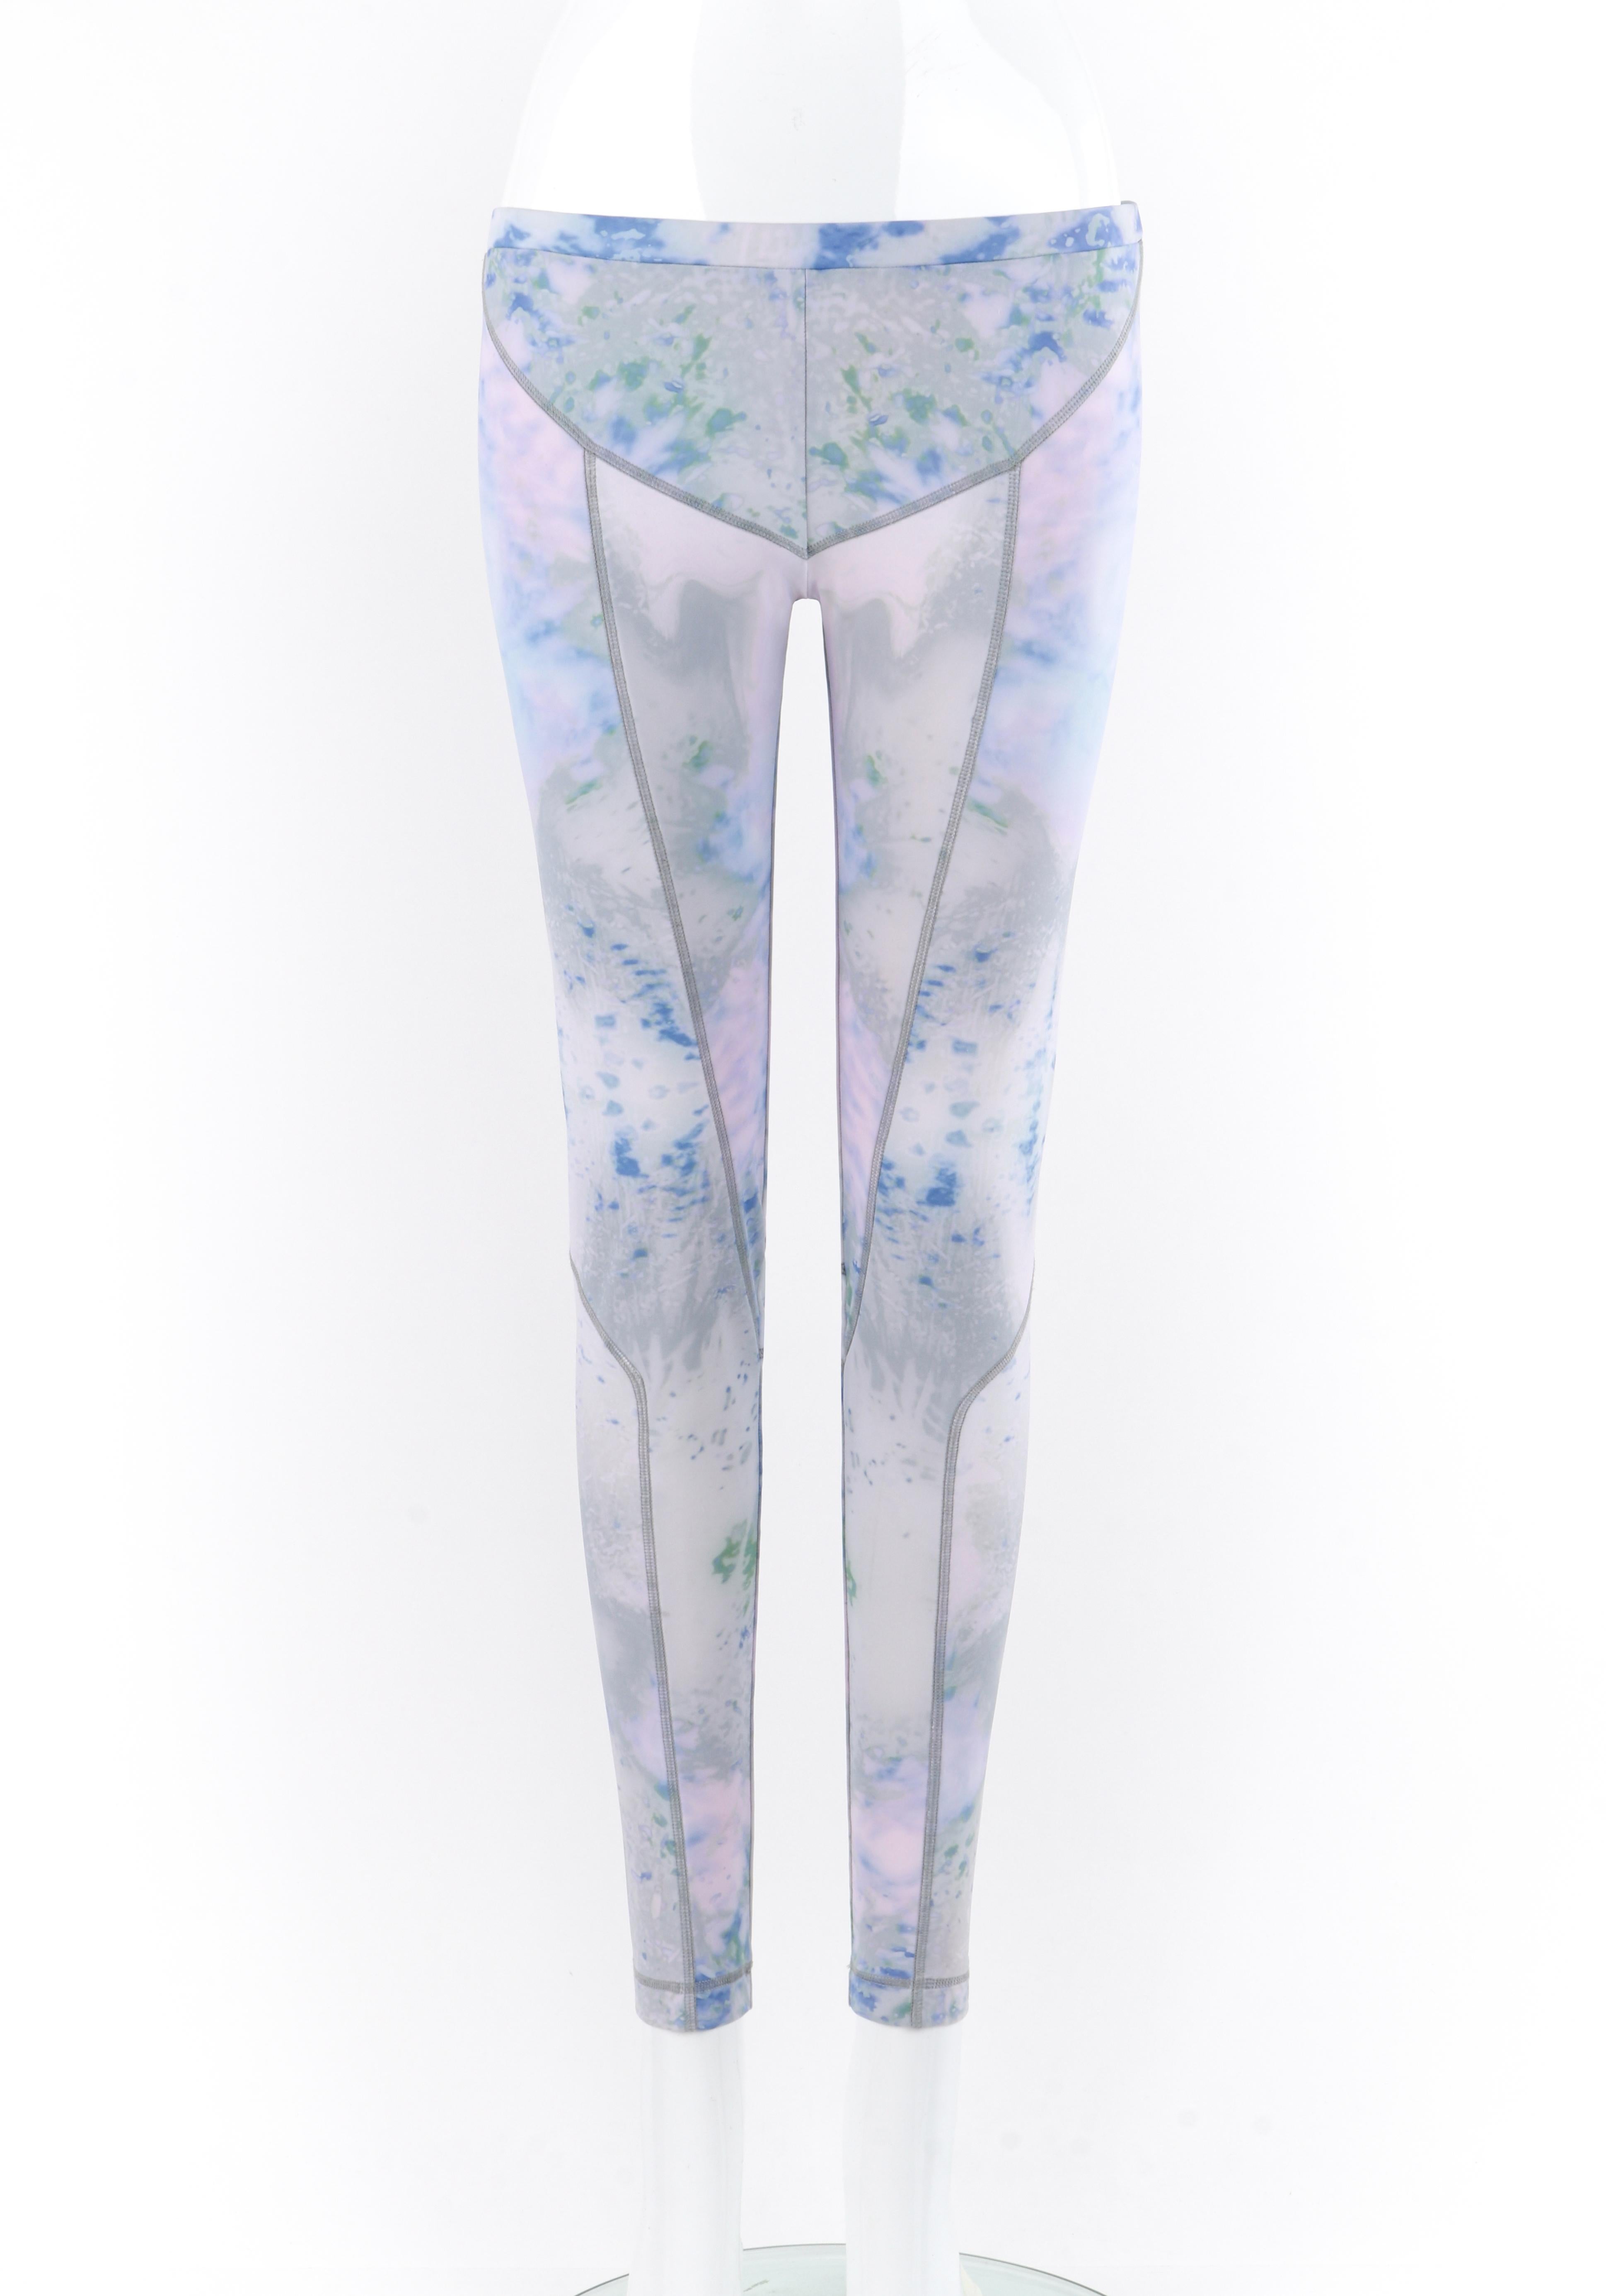 Brand / Manufacturer: Alexander McQueen / McQ
Circa: 2012
Designer: Sarah Burton 
Style: Leggings
Color(s): Shades of green, blue, pink, white, gray
Lined: No
Marked Fabric Content: 